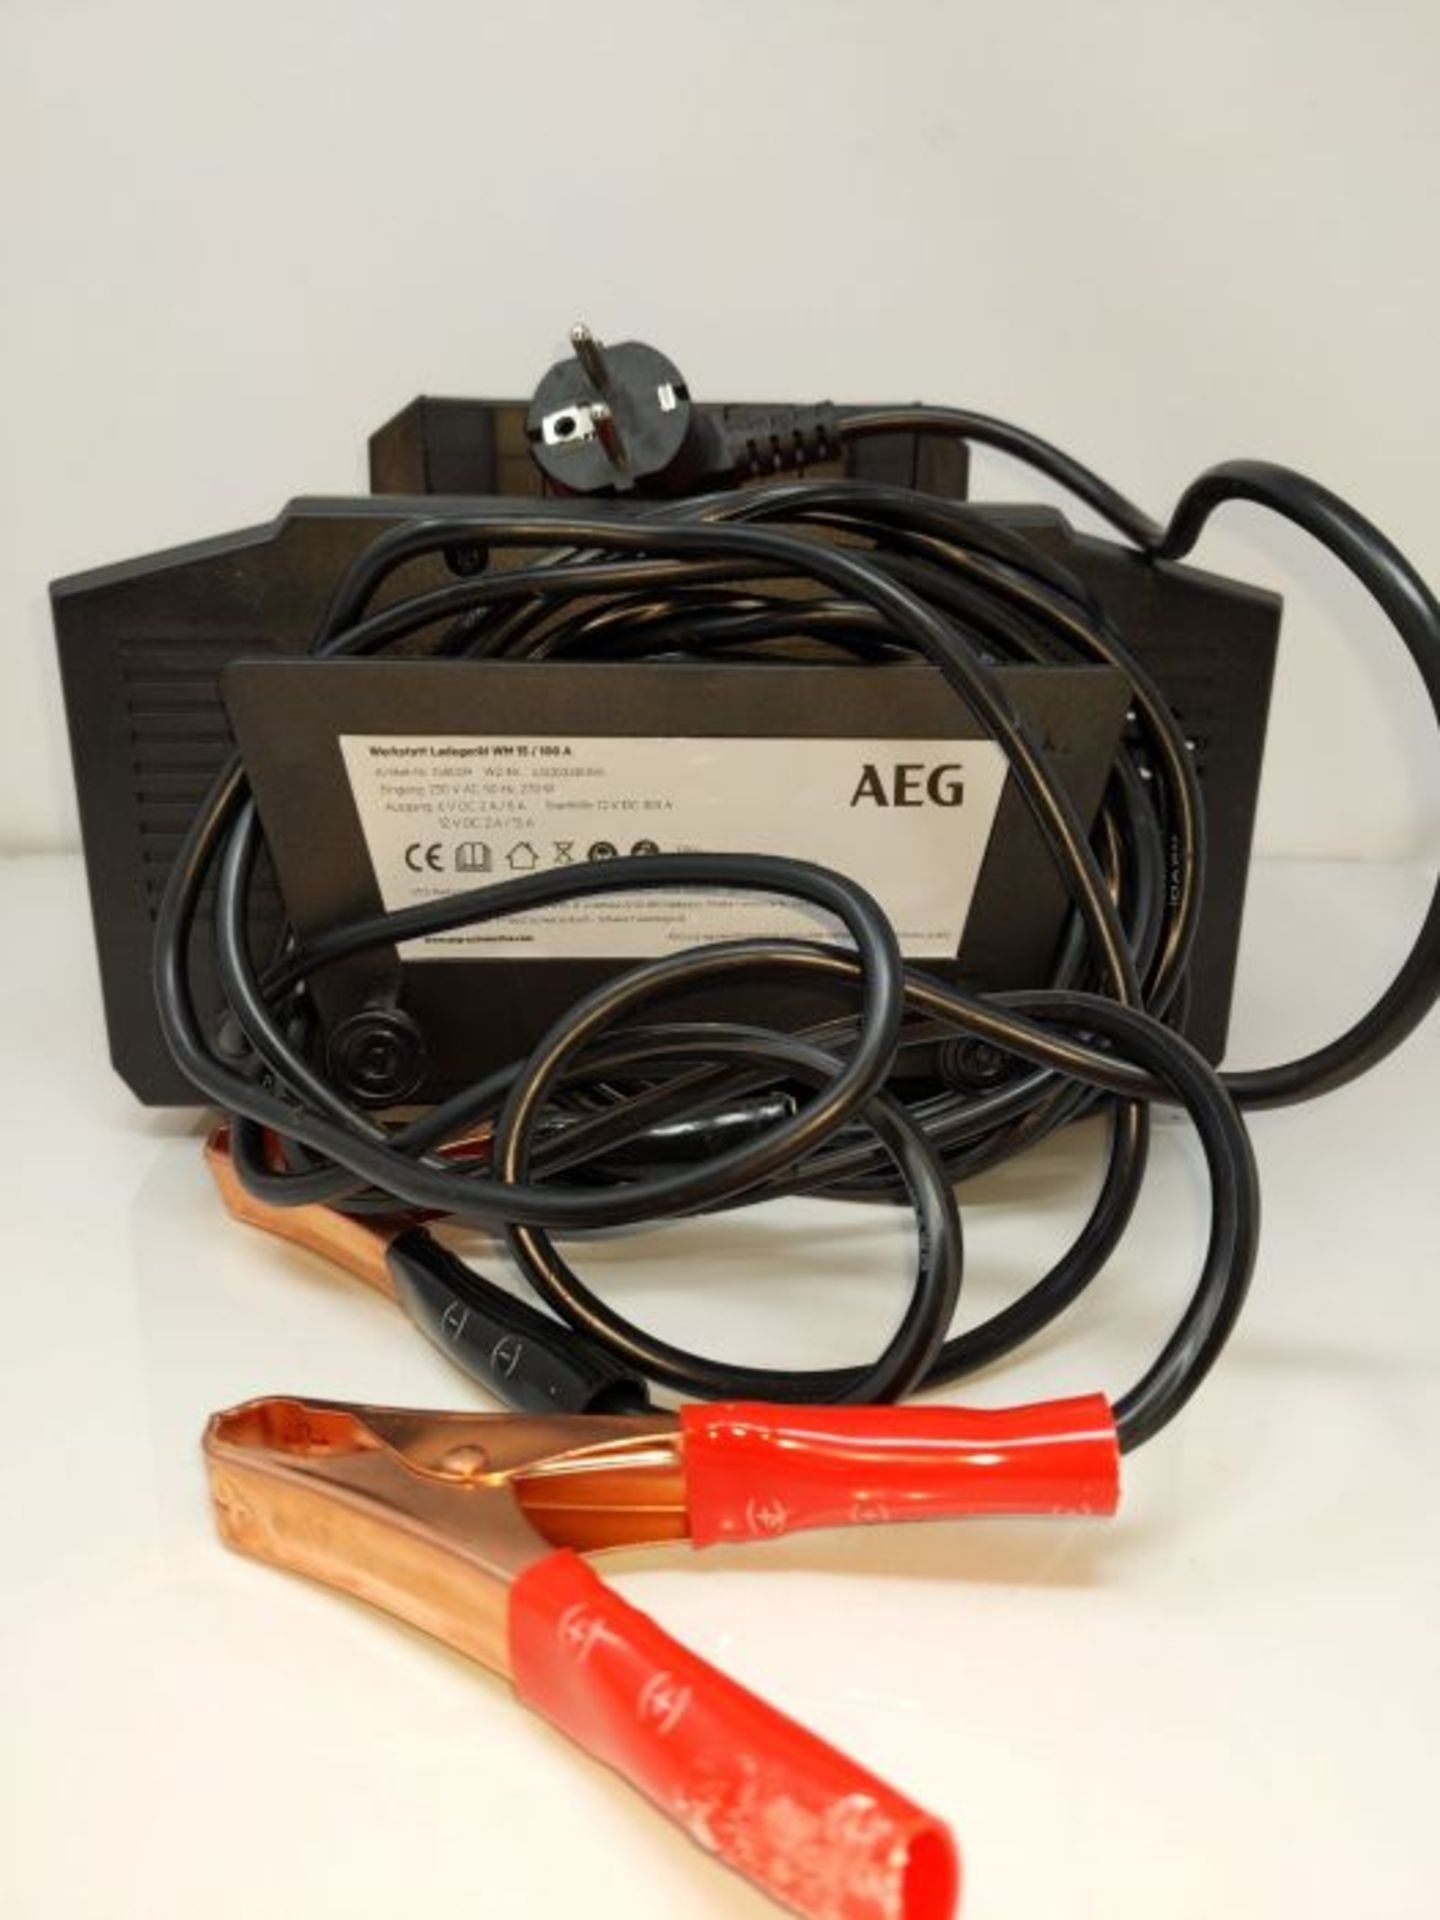 RRP £88.00 Aeg Automotive 158009 Workshop Charger WM Ampere for 6 and 12 Volt Batteries with Auto - Image 3 of 3